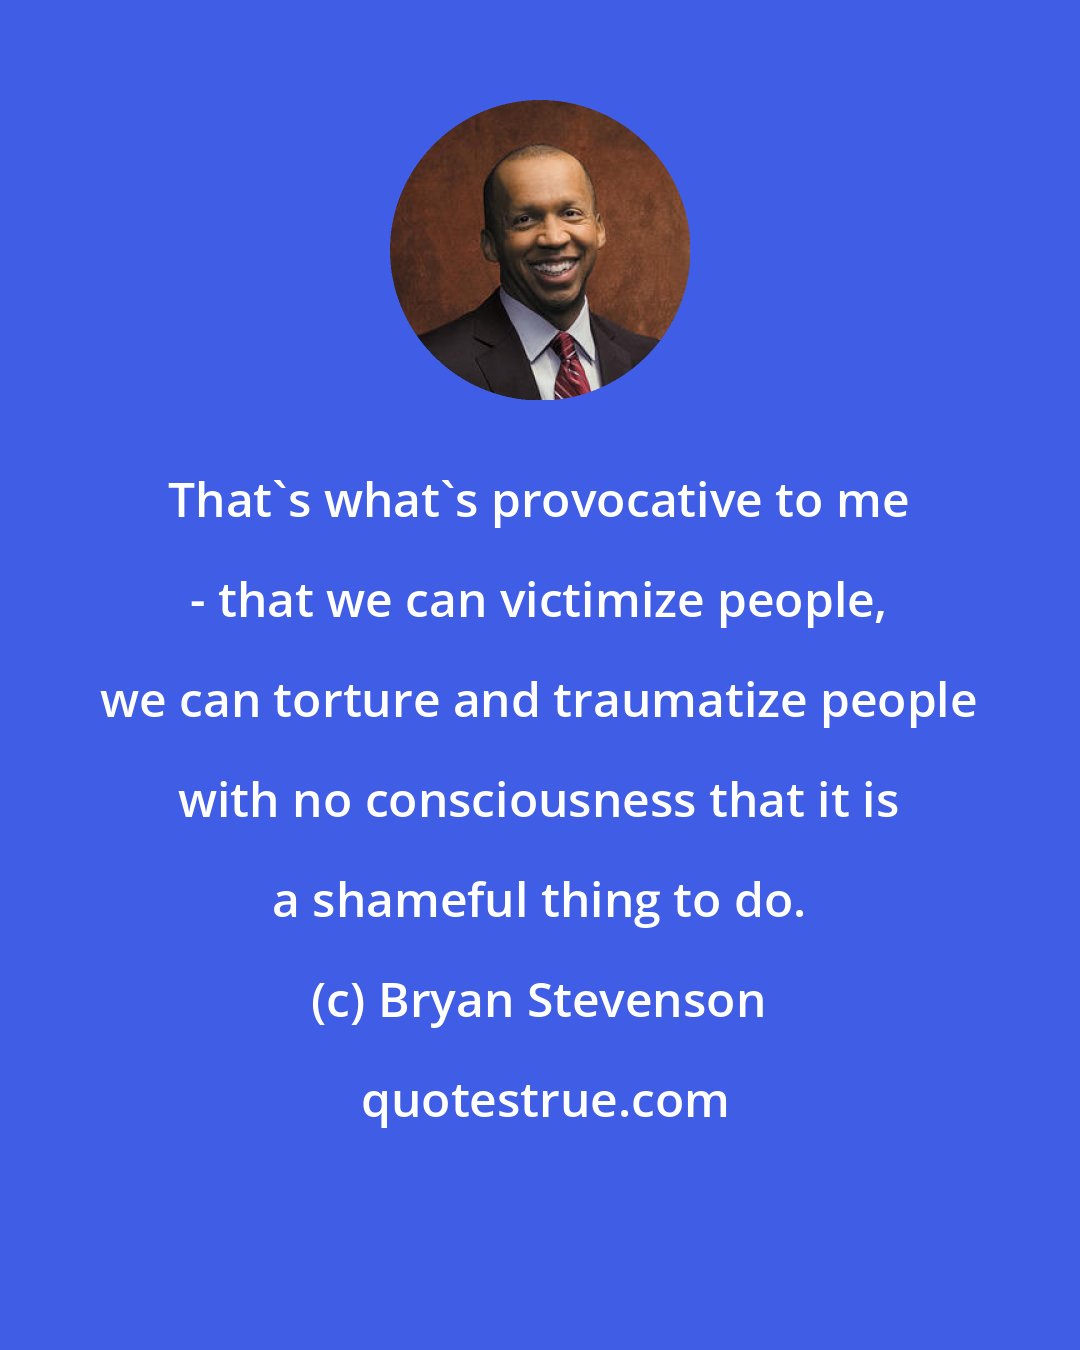 Bryan Stevenson: That's what's provocative to me - that we can victimize people, we can torture and traumatize people with no consciousness that it is a shameful thing to do.